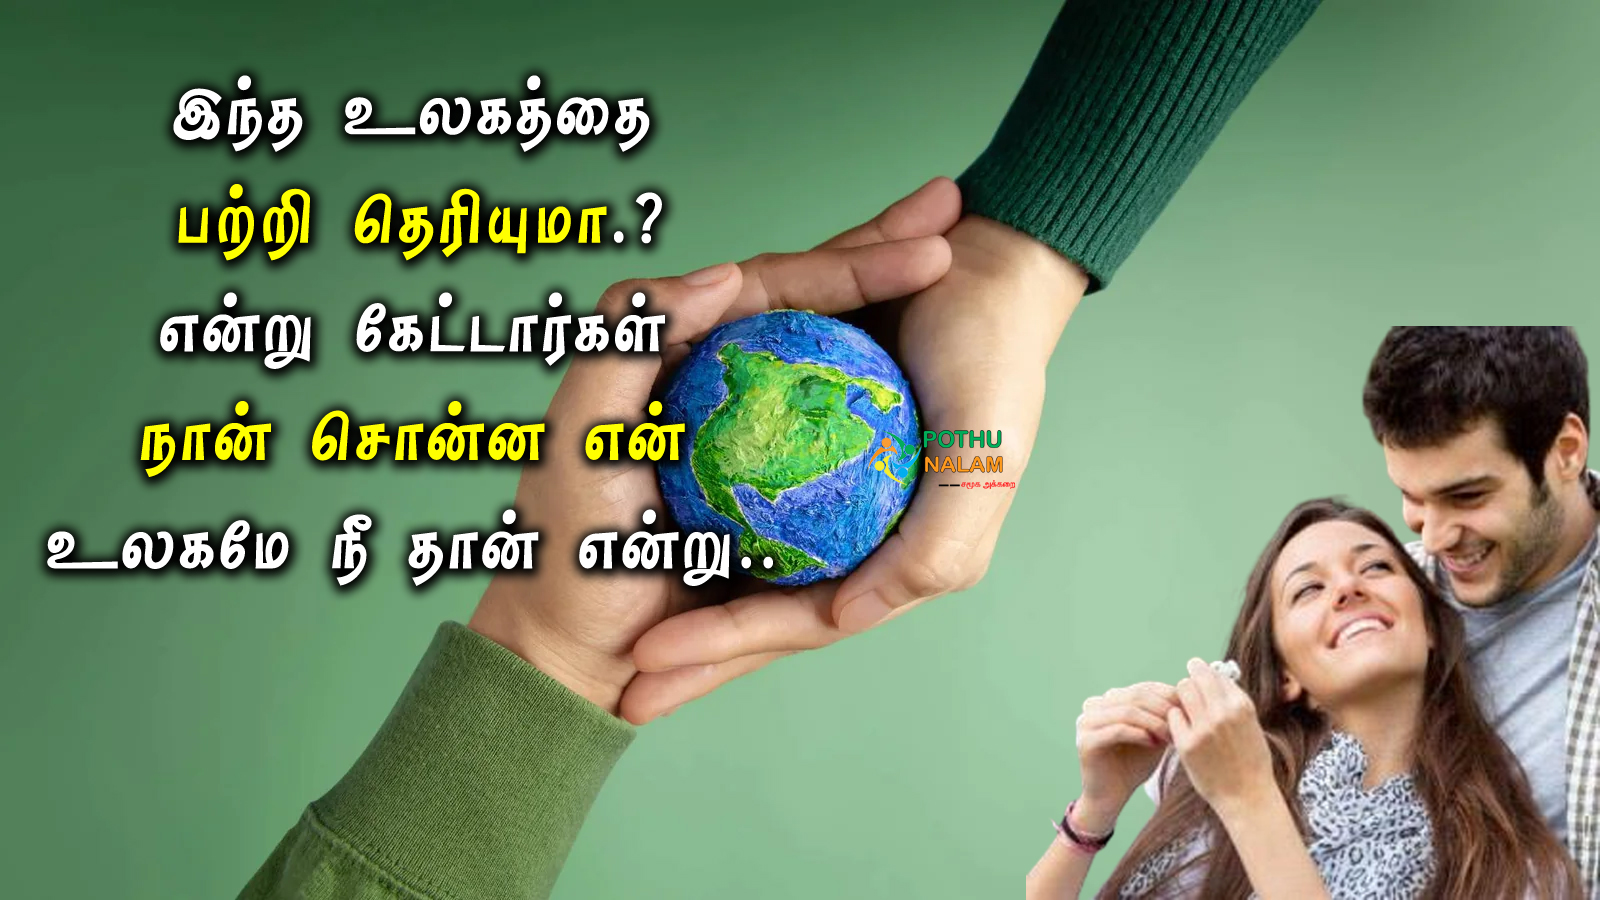 True Love Husband Wife Quotes in Tamil